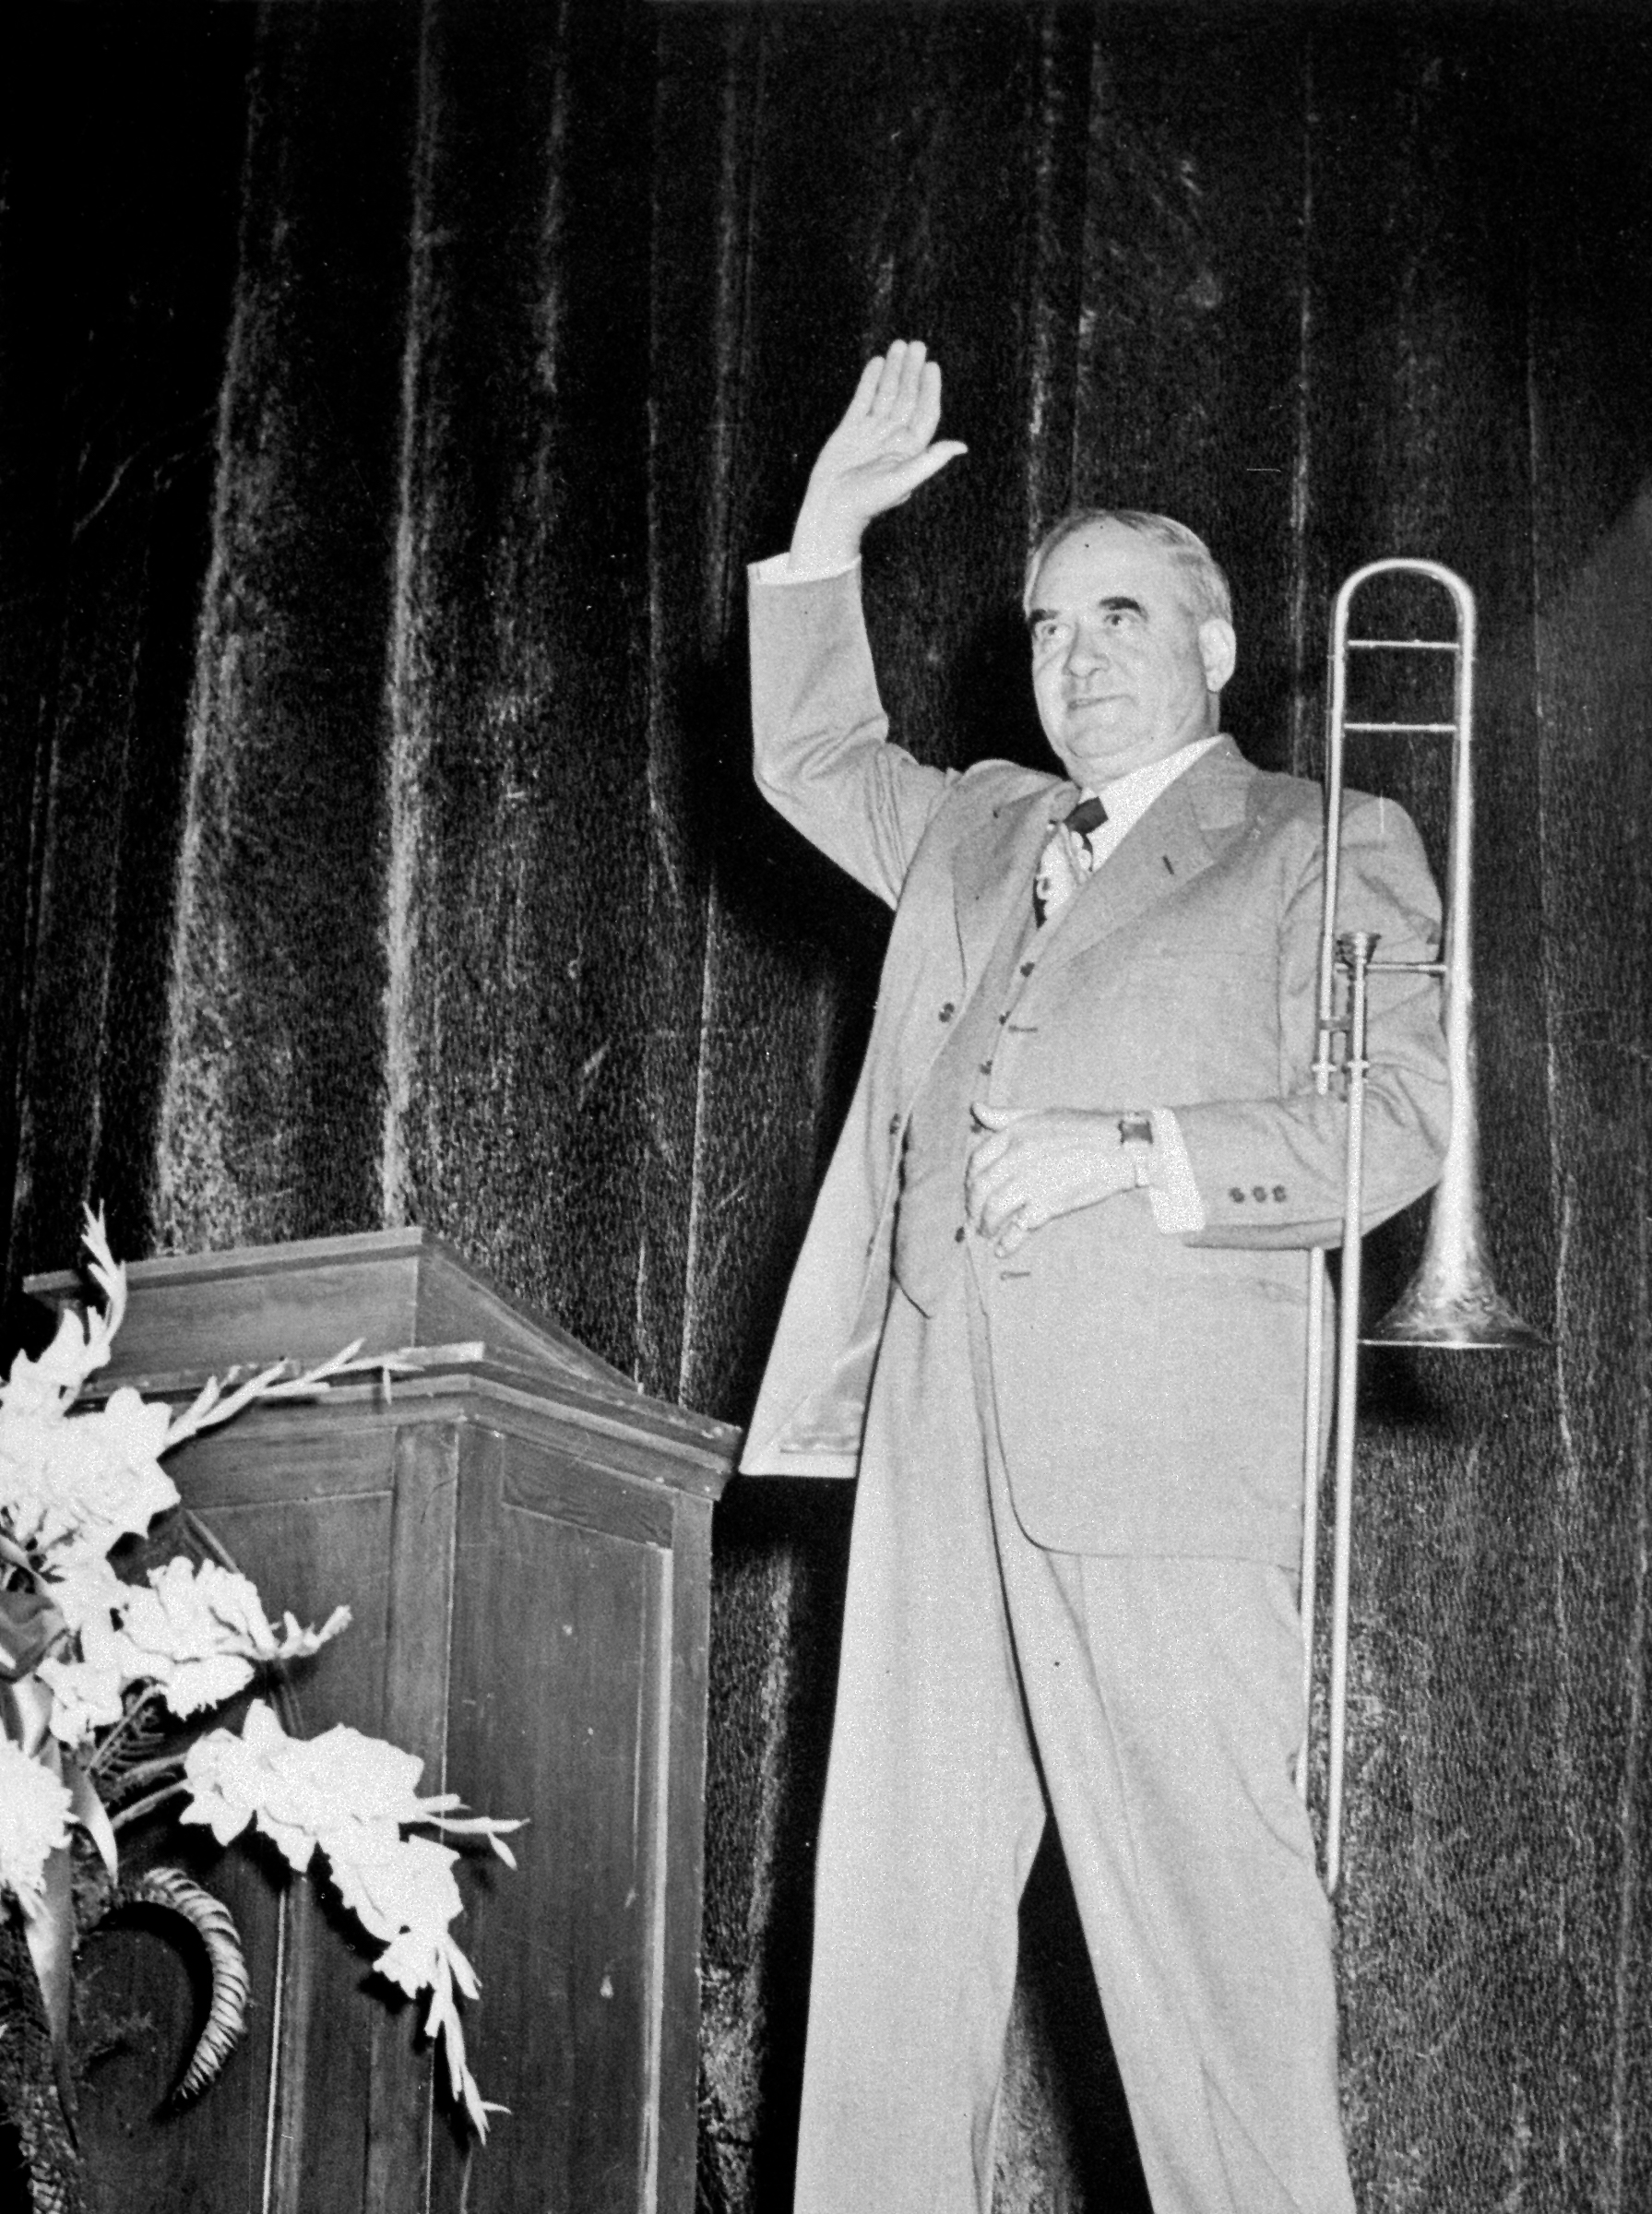 Homer Rodeheaver leads music with his trombone in Rodeheaver Auditorium at the 1951 Bible Conference